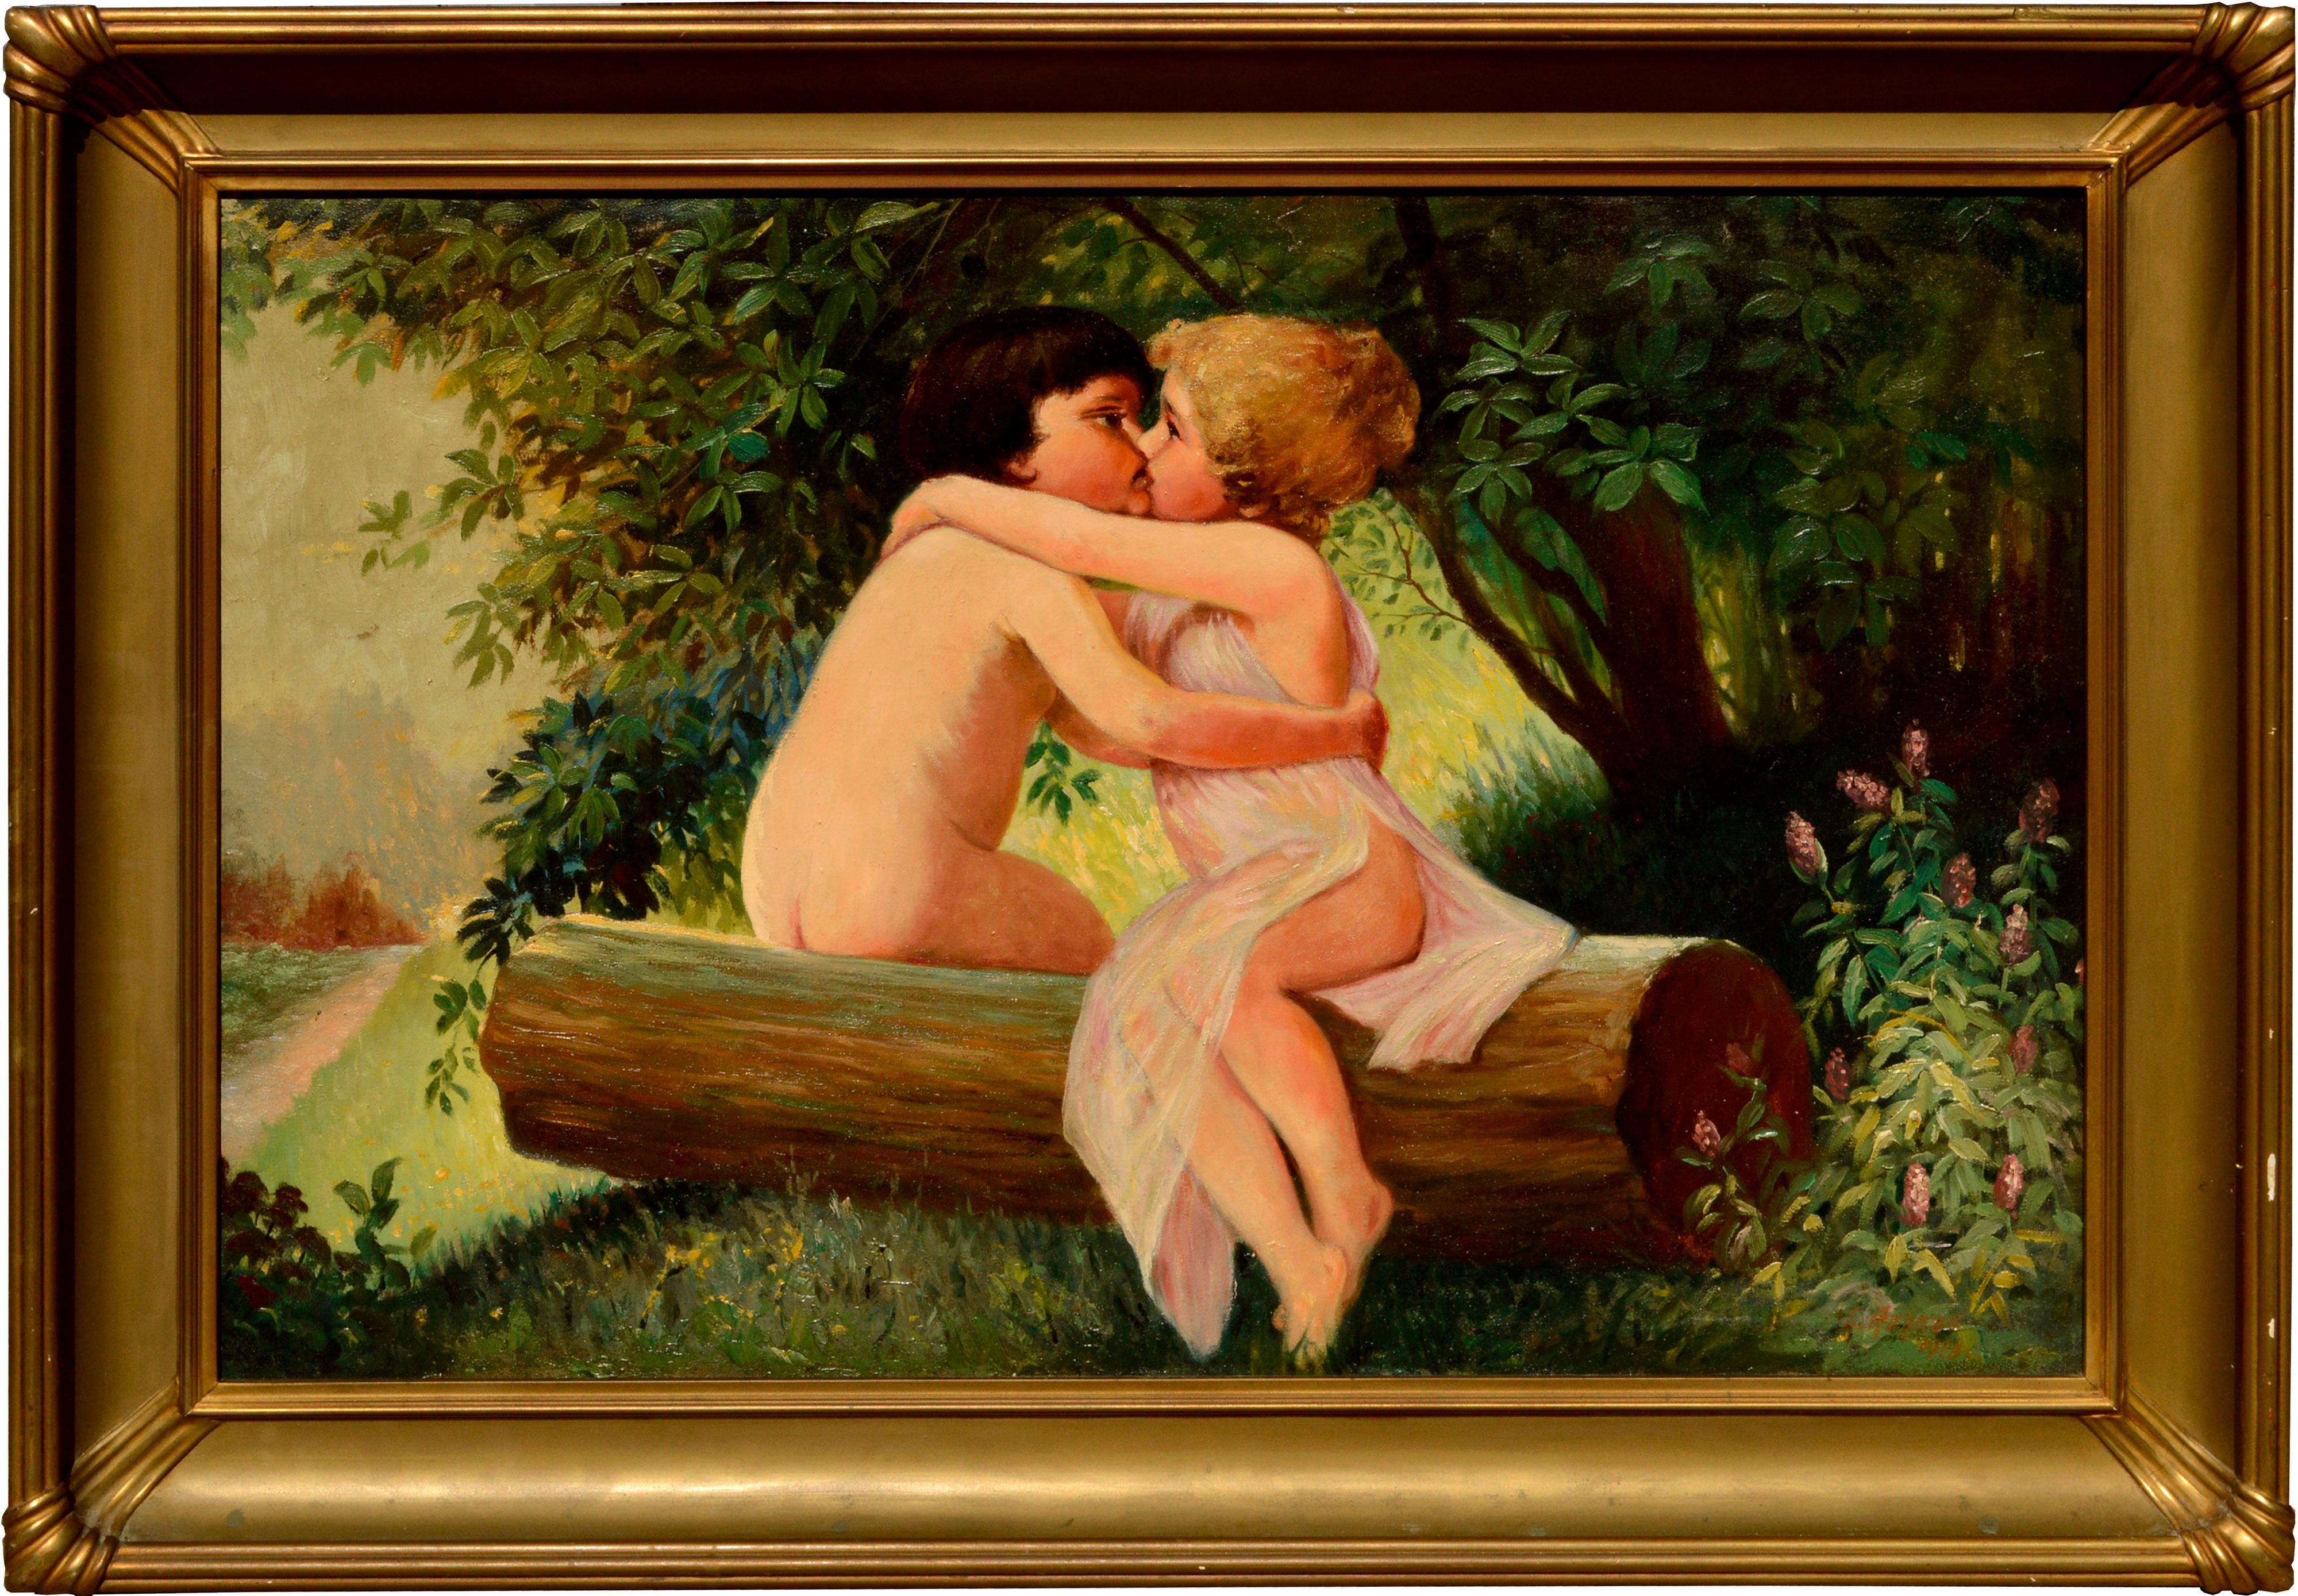 Carl F. Ruhnau Landscape Painting - Kissing Wood Nymphs - Early 20th Century Figurative Landscape 